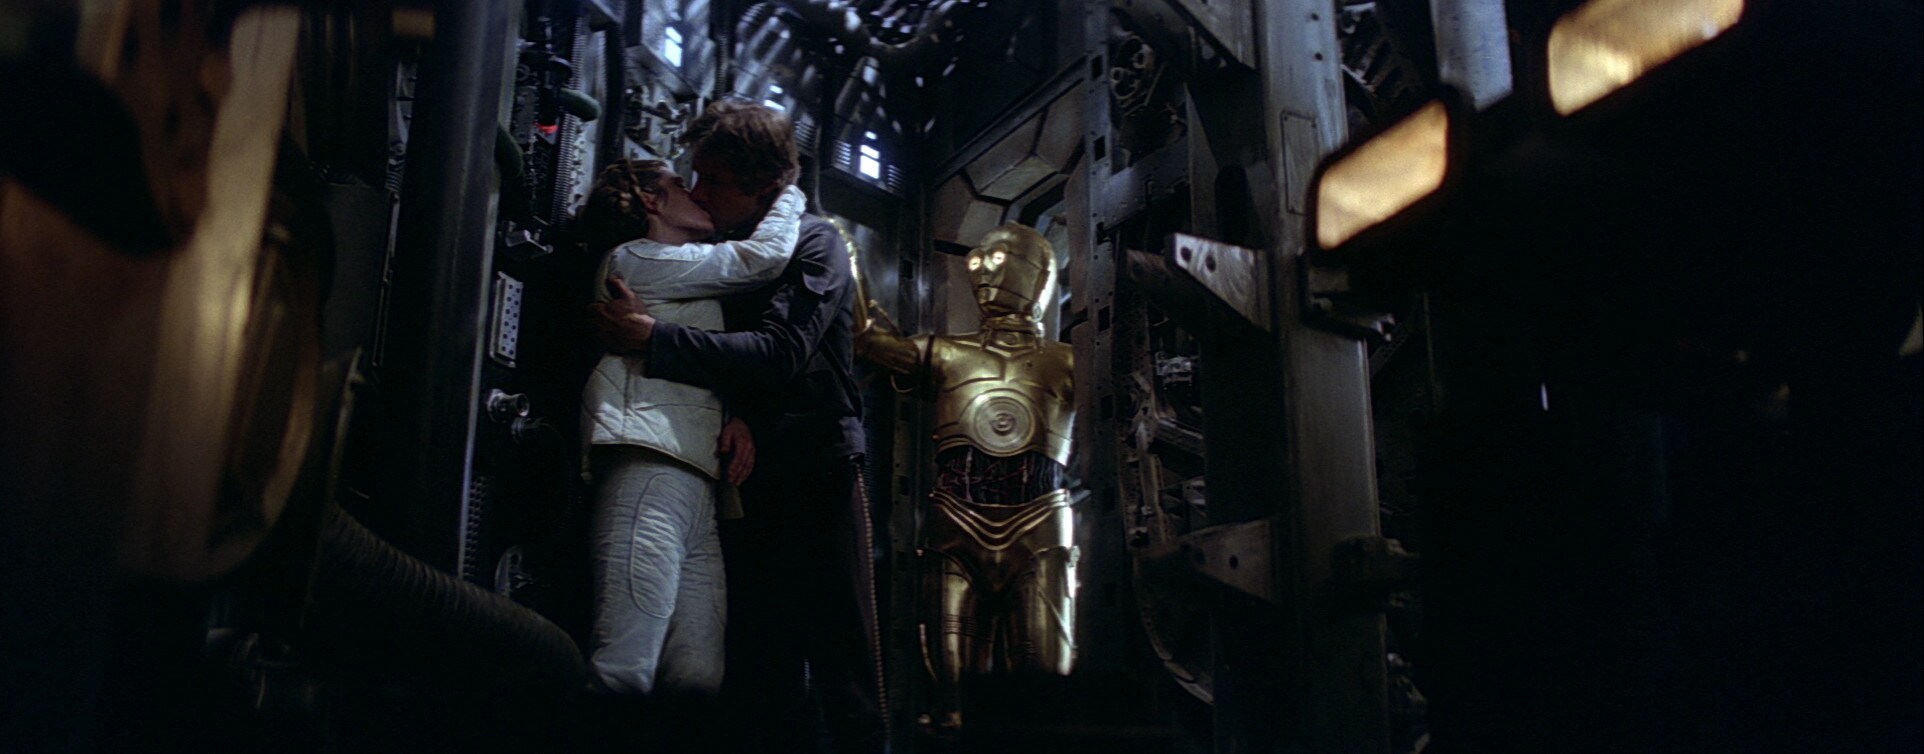 C-3PO interrupts Han and Leia in The Empire Strikes Back